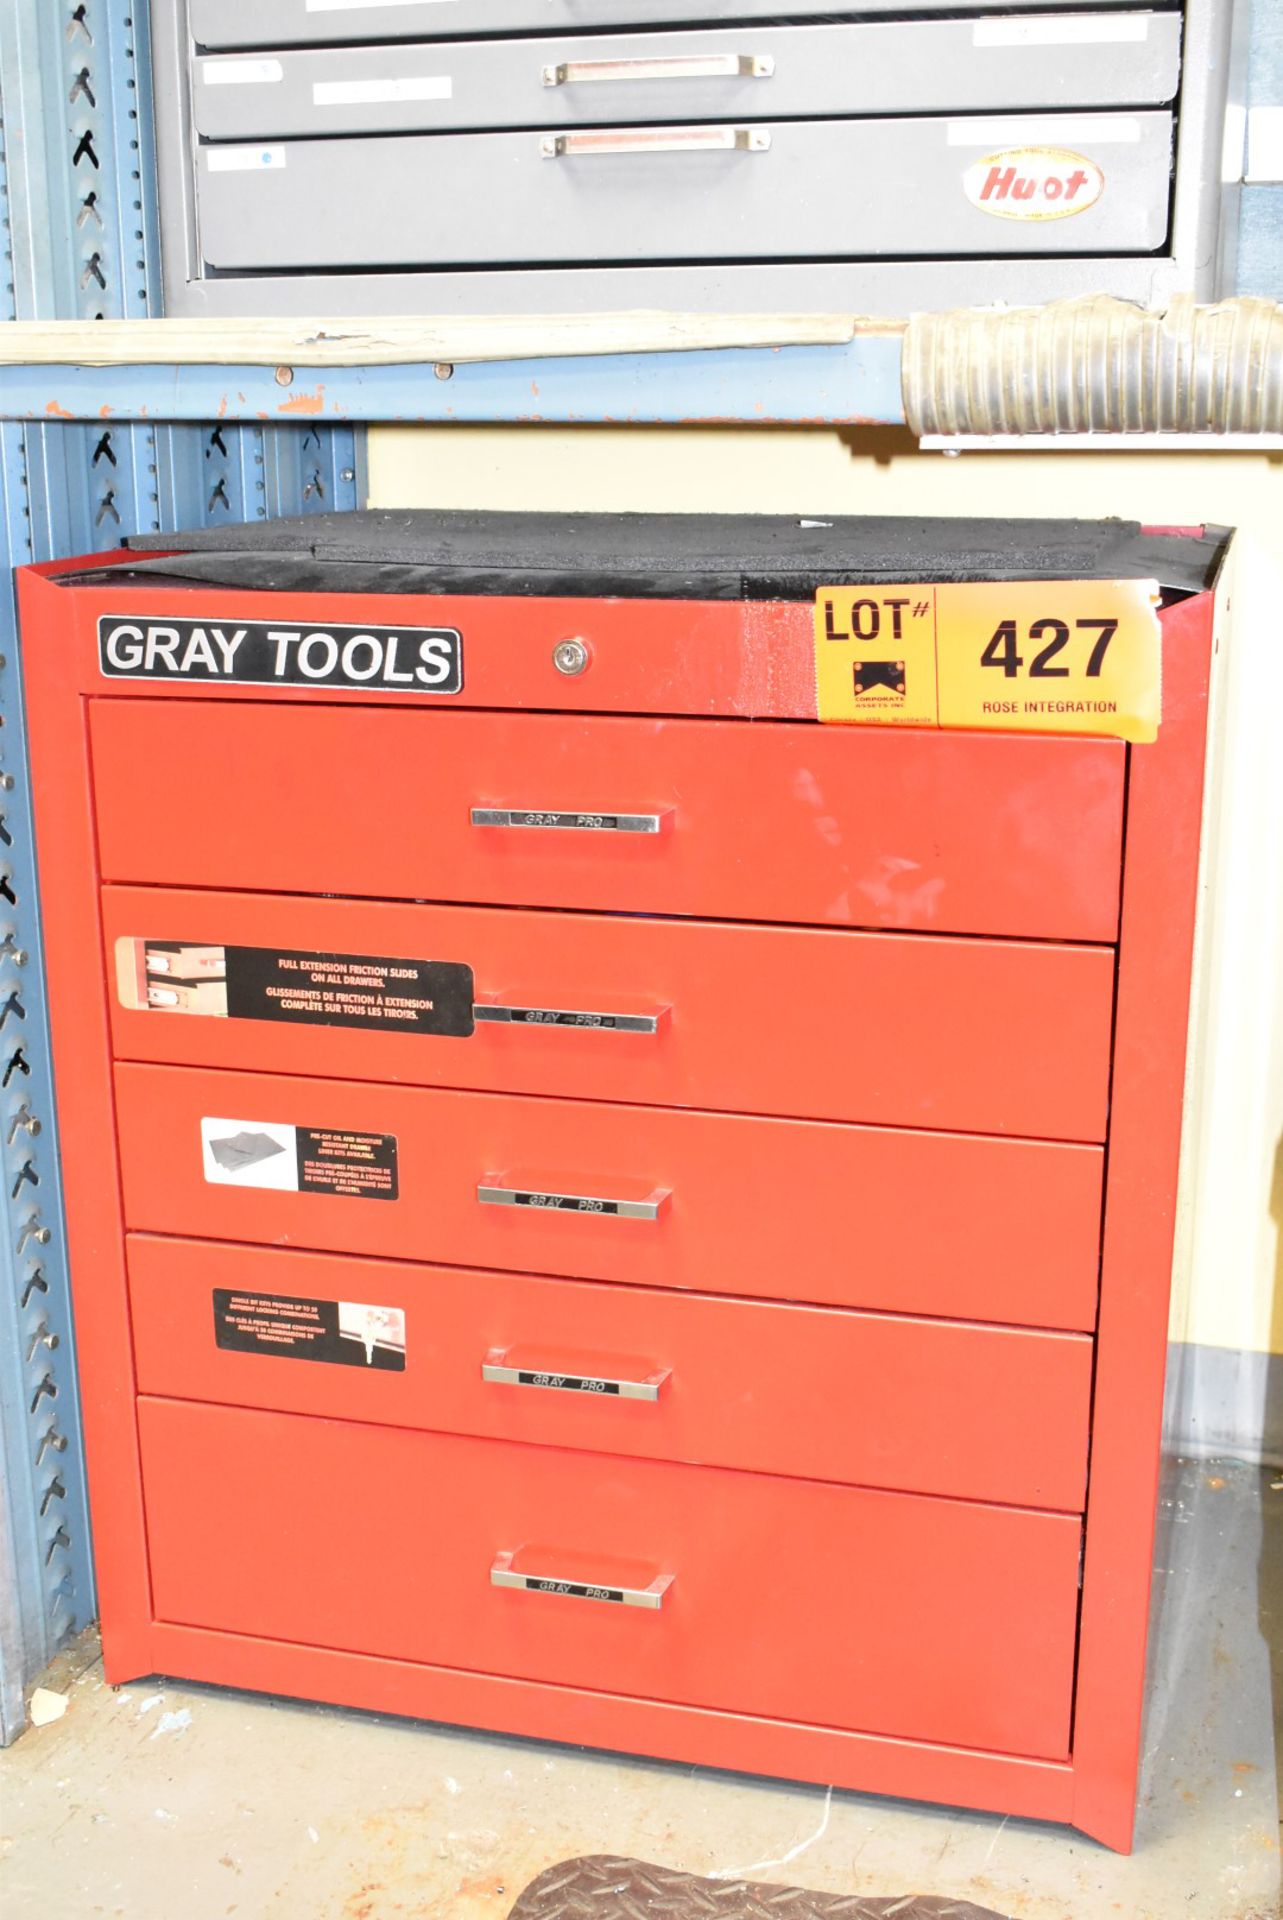 LOT/ GRAY TOOLS 5-DRAWER TOOLBOX WITH CONTENTS CONSISTING OF HAND TOOLS